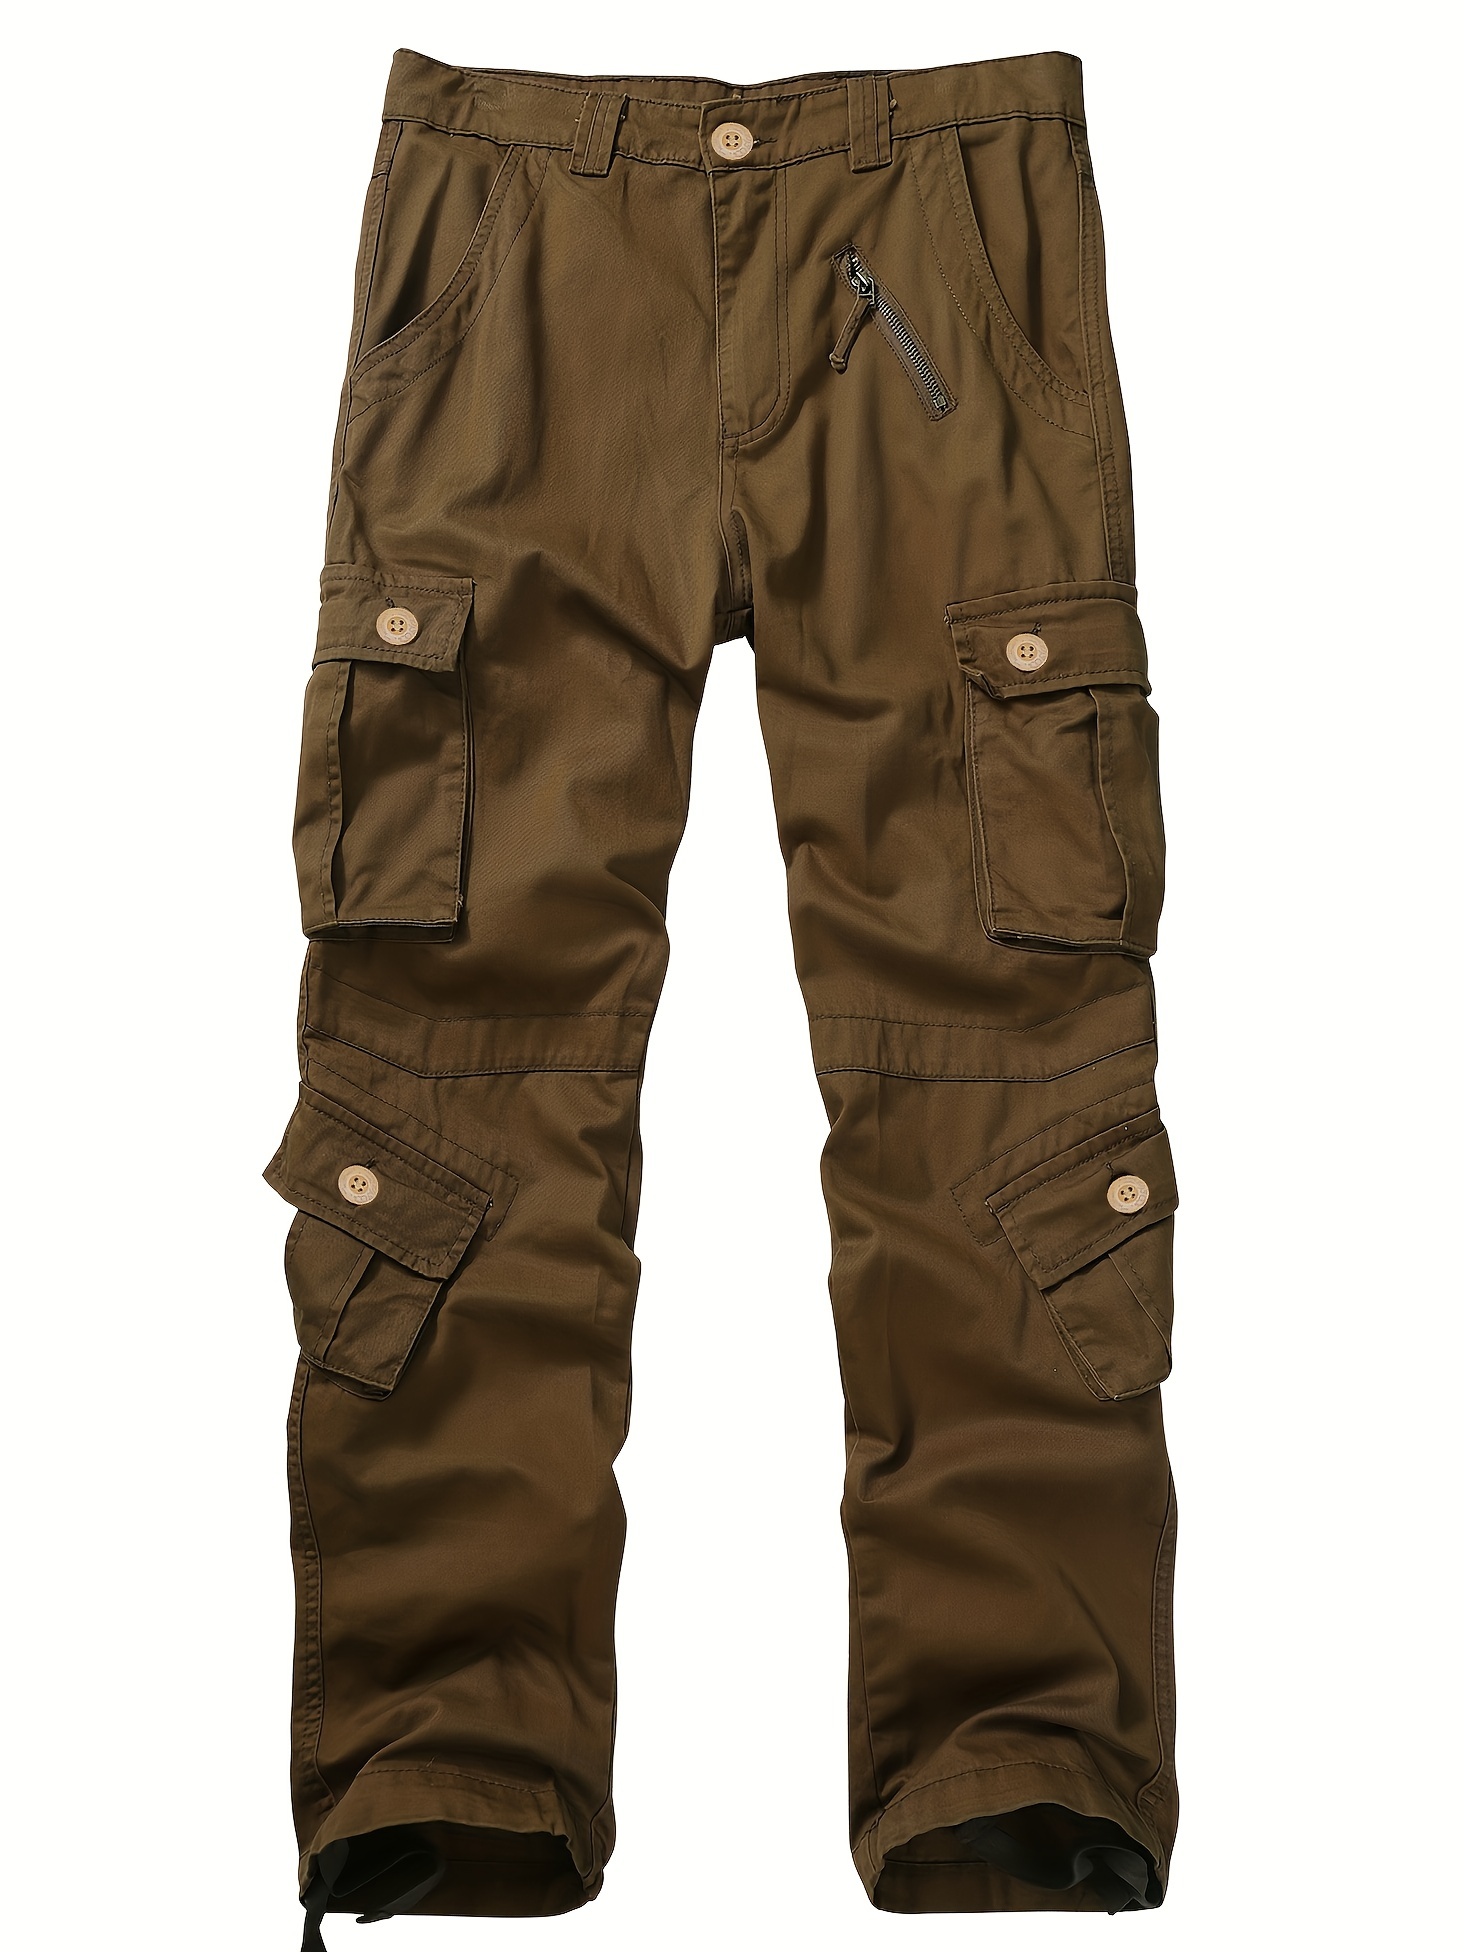 Mens Cargo Military Trousers Six Pocket Army Combat Pants Casual